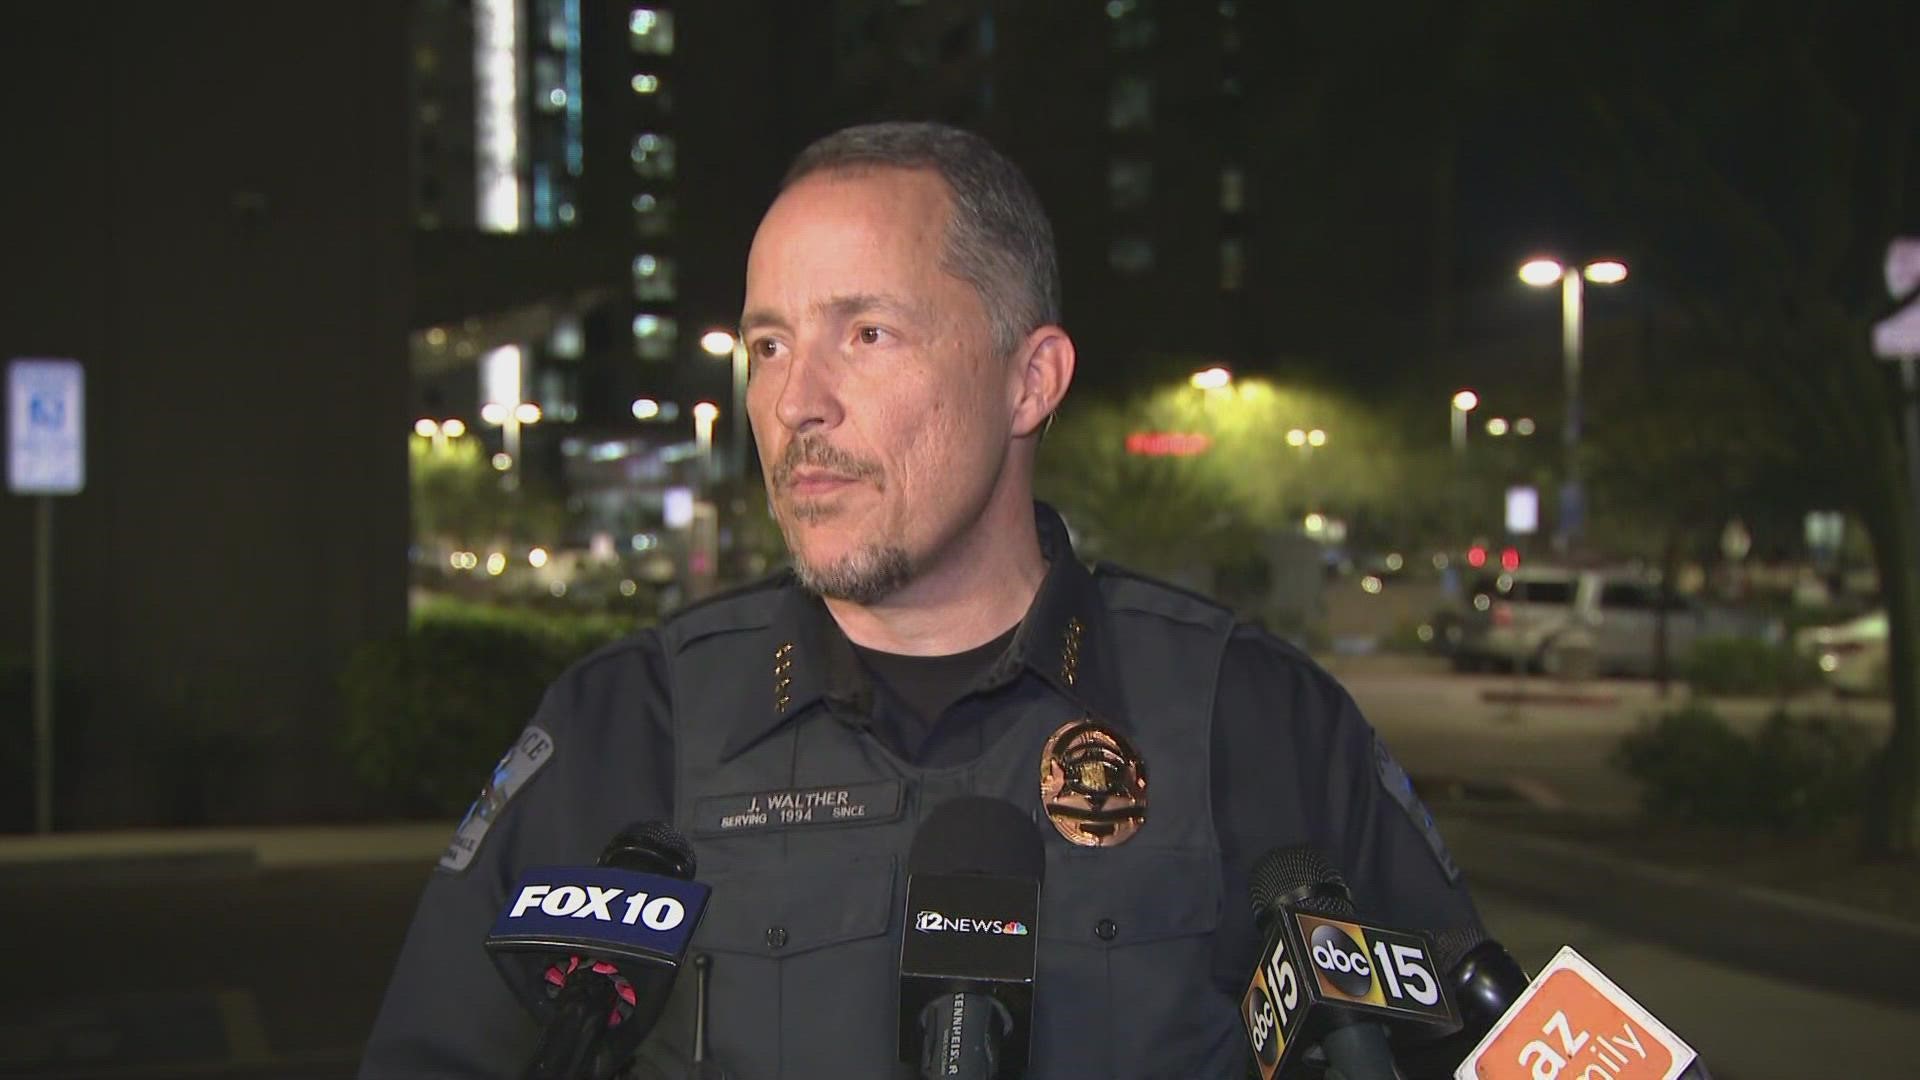 Scottsdale police said the officer involved in the shooting is expected to survive his injuries.